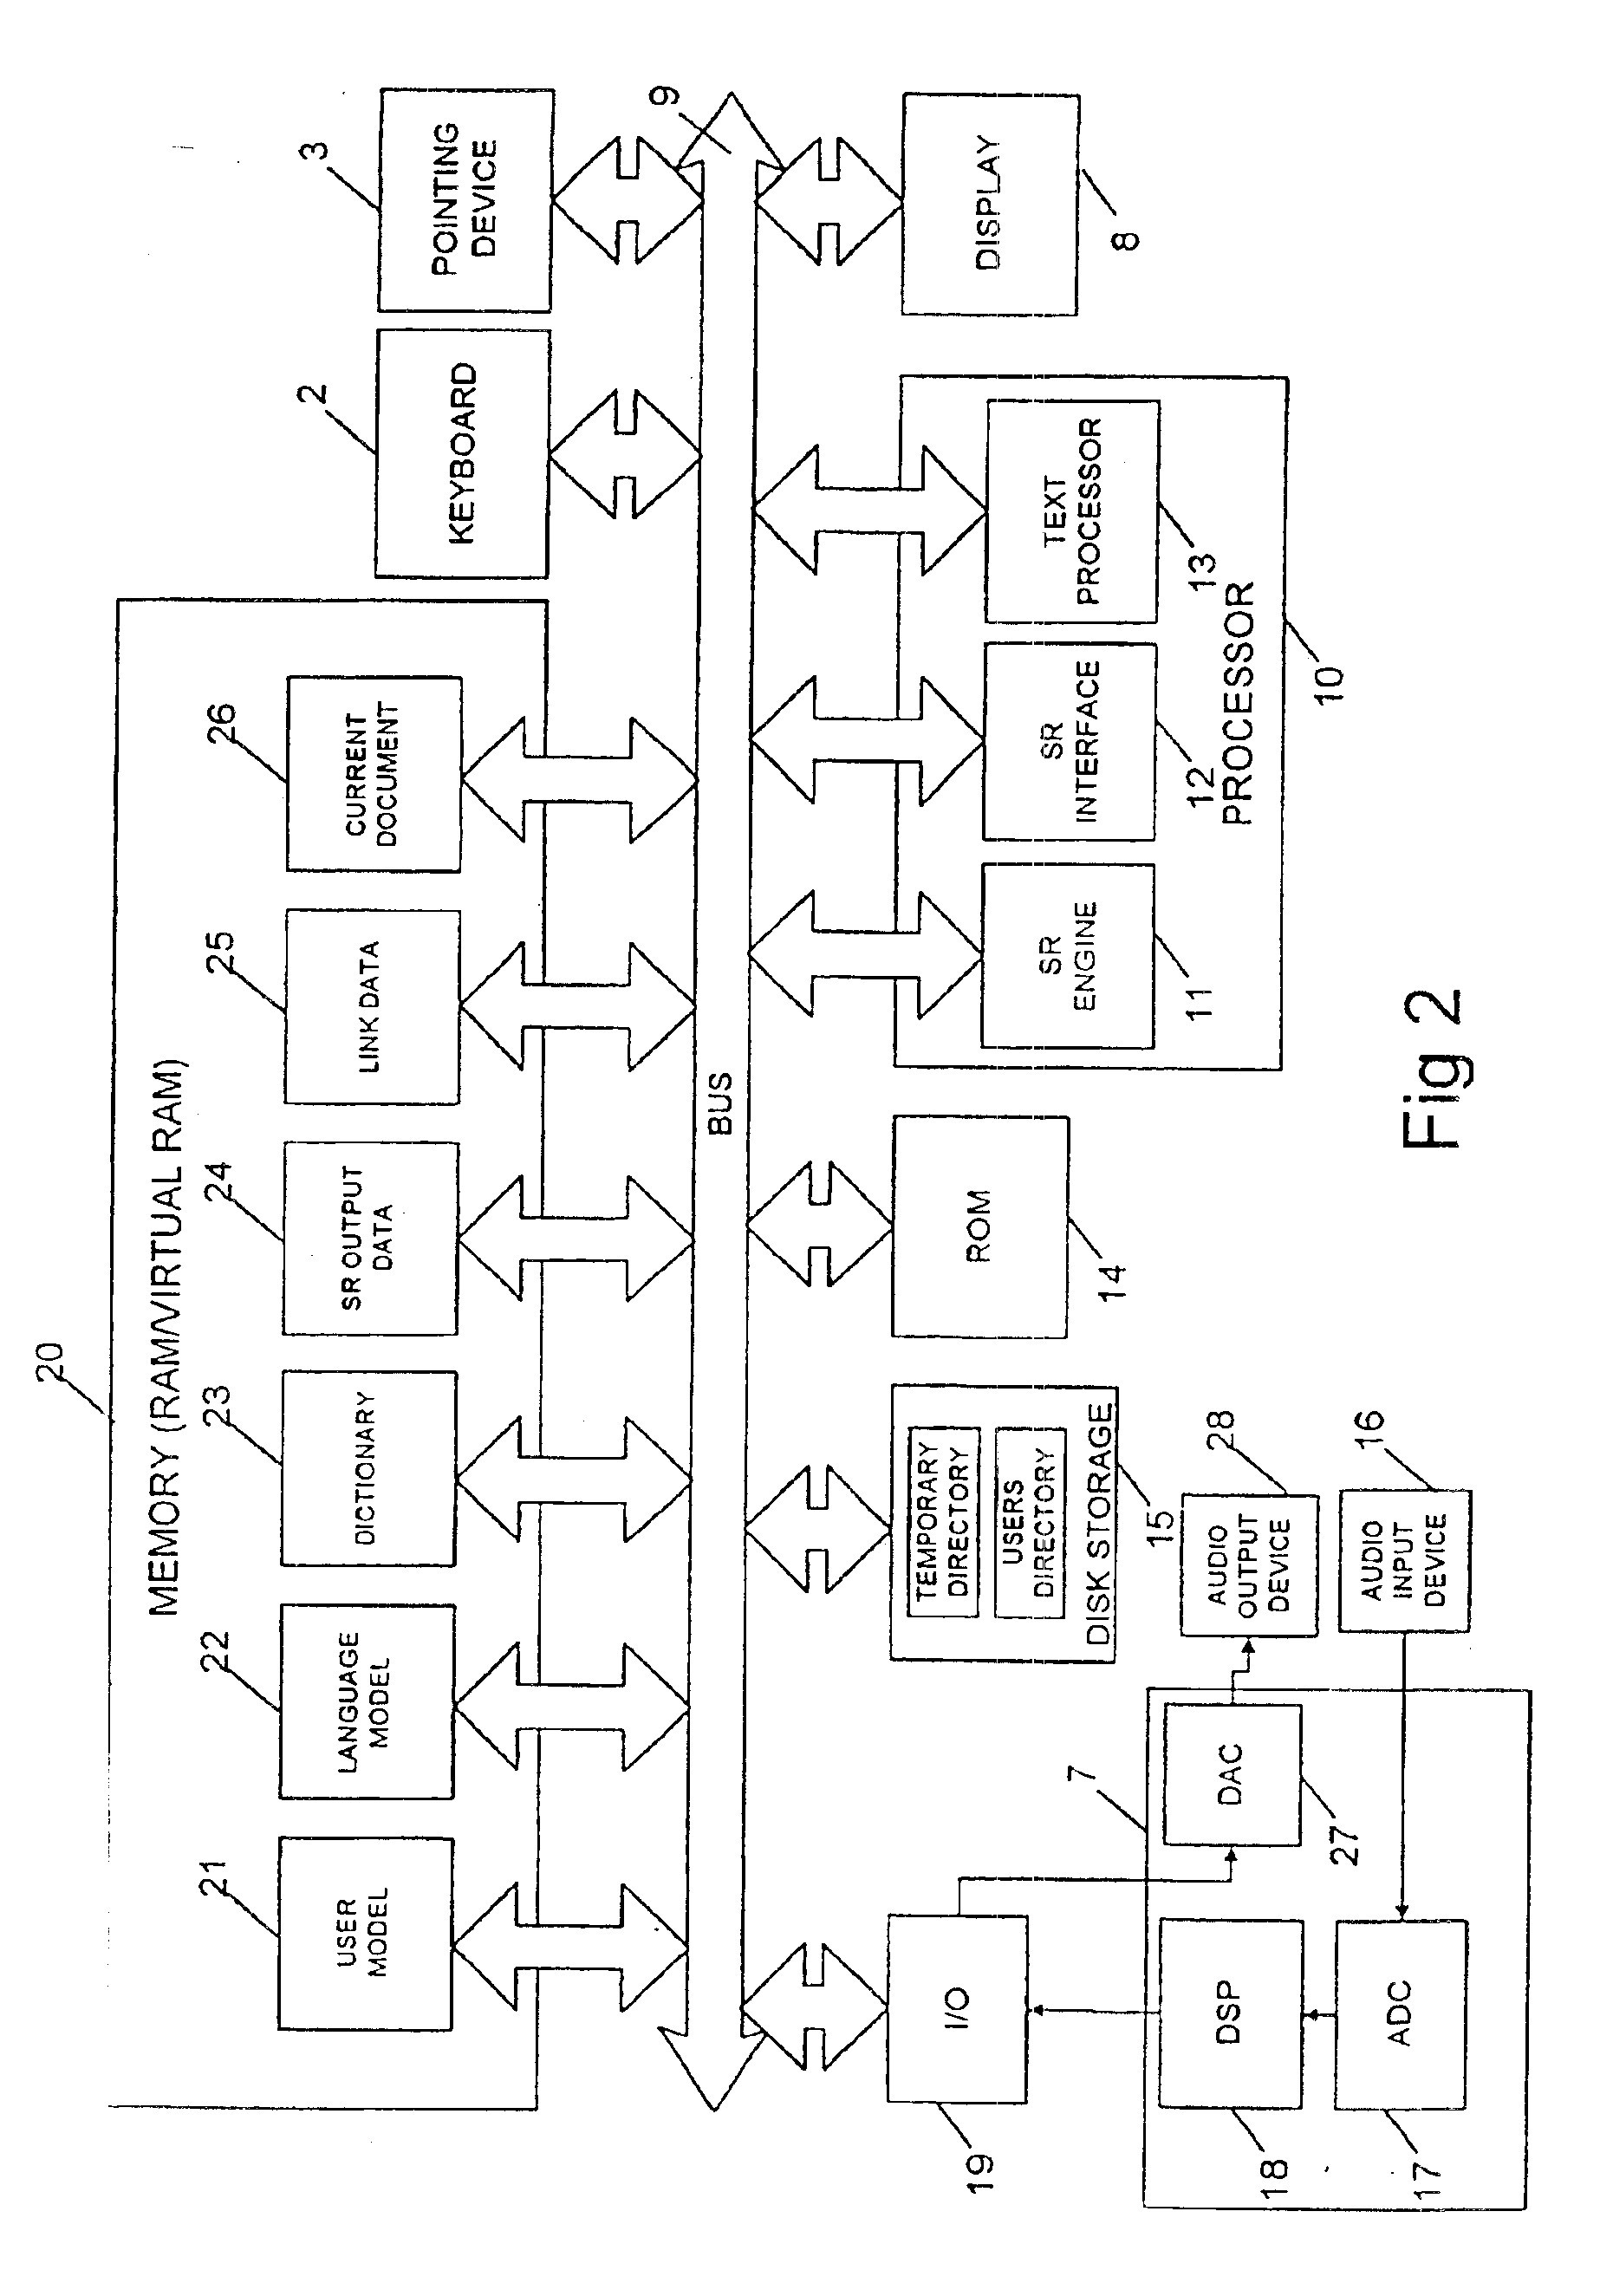 Method and apparatus for processing the output of a speech recognition engine